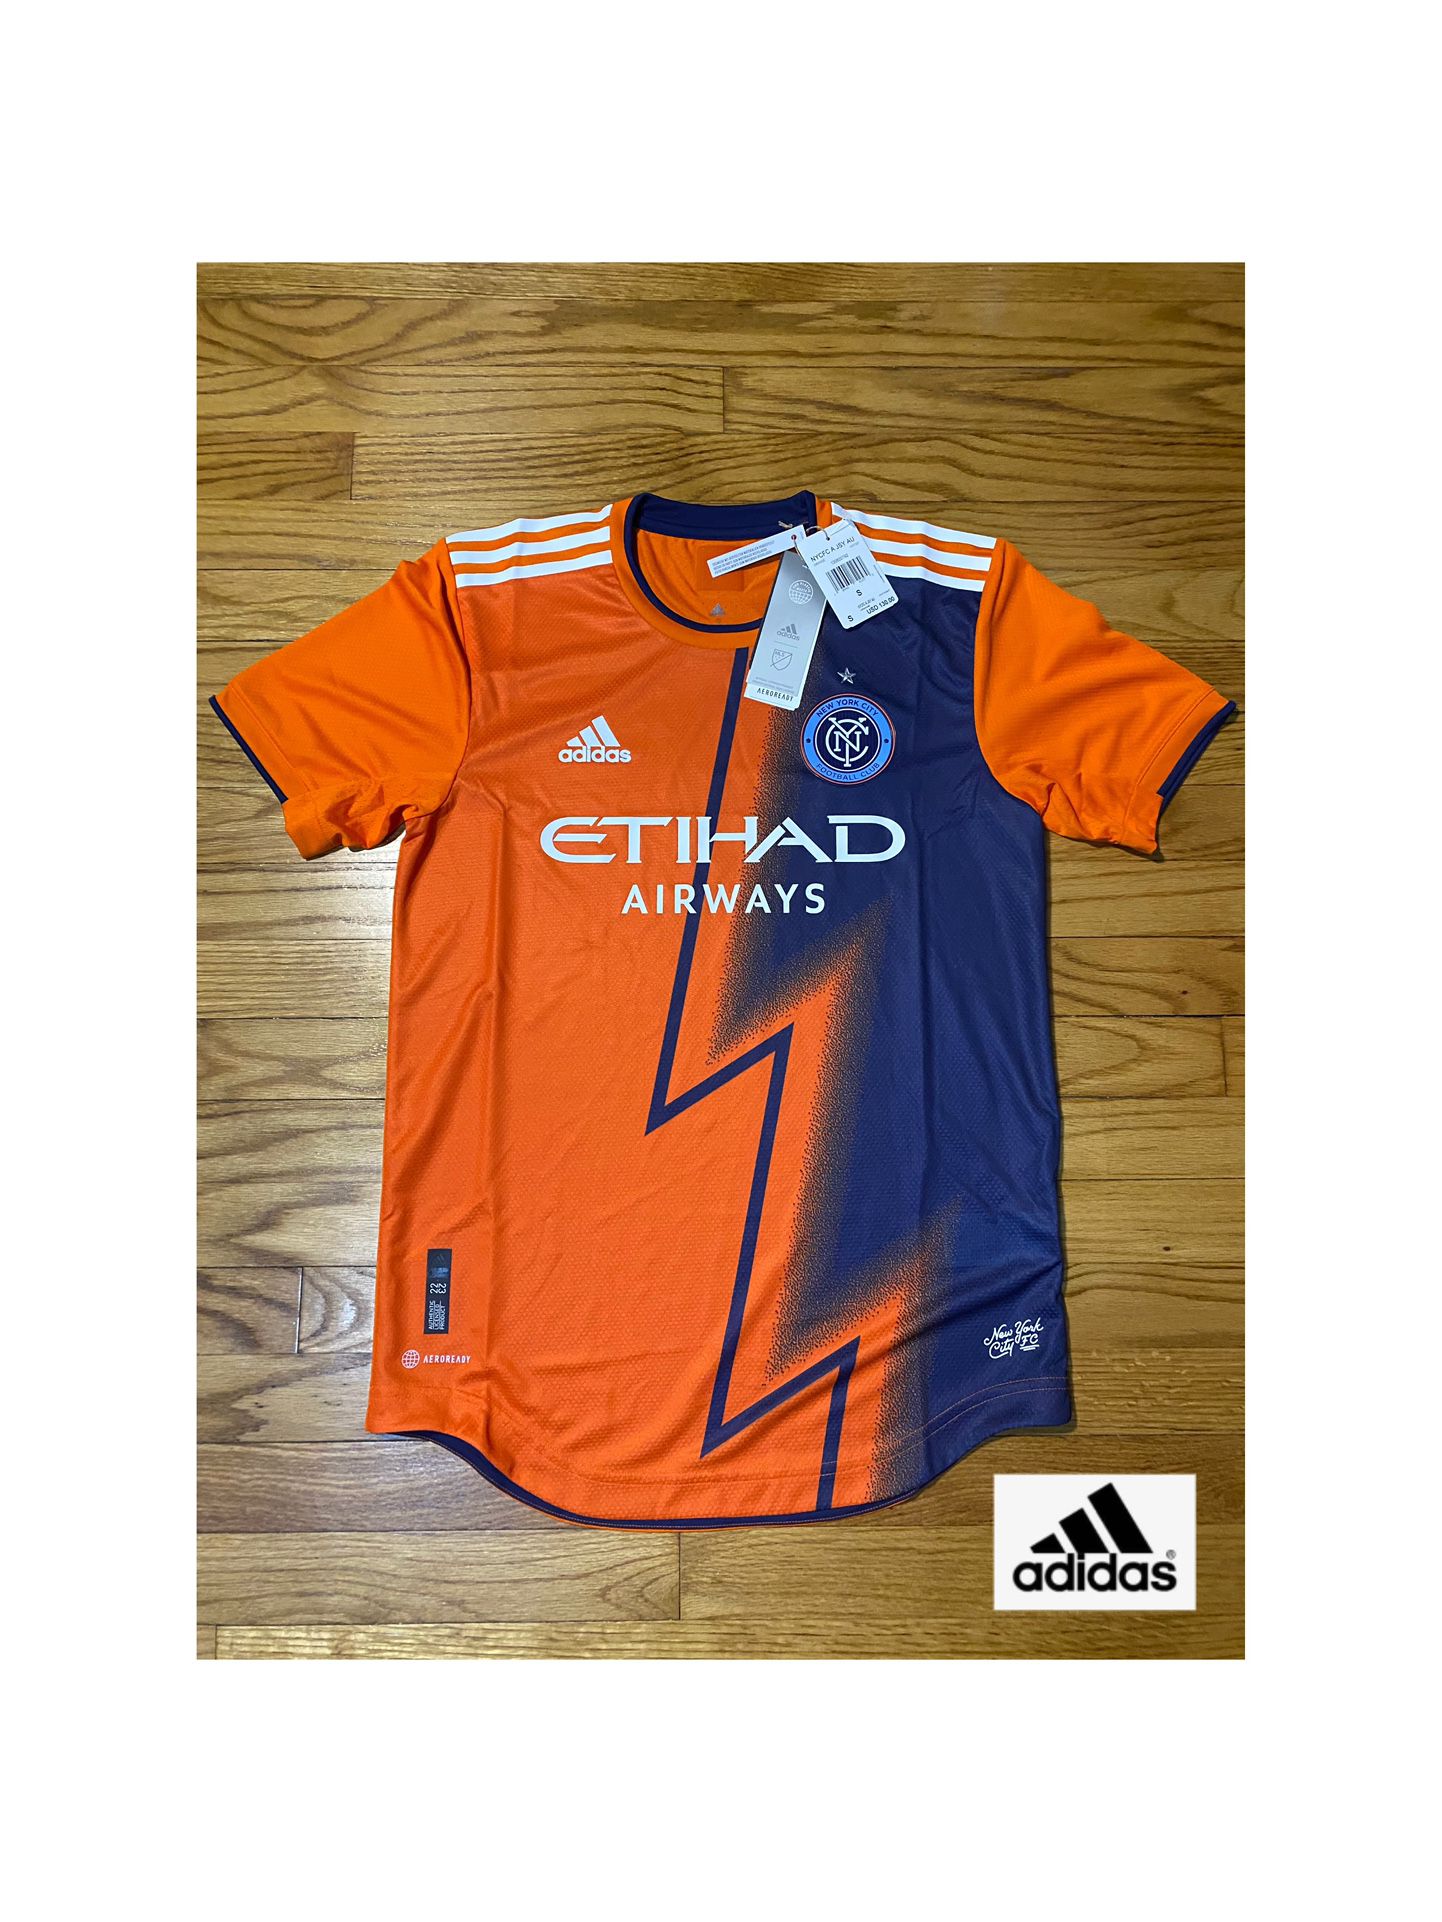 adidas New York City FC NYCFC Away Soccer Authentic Jersey Men’s Sz S New!! 